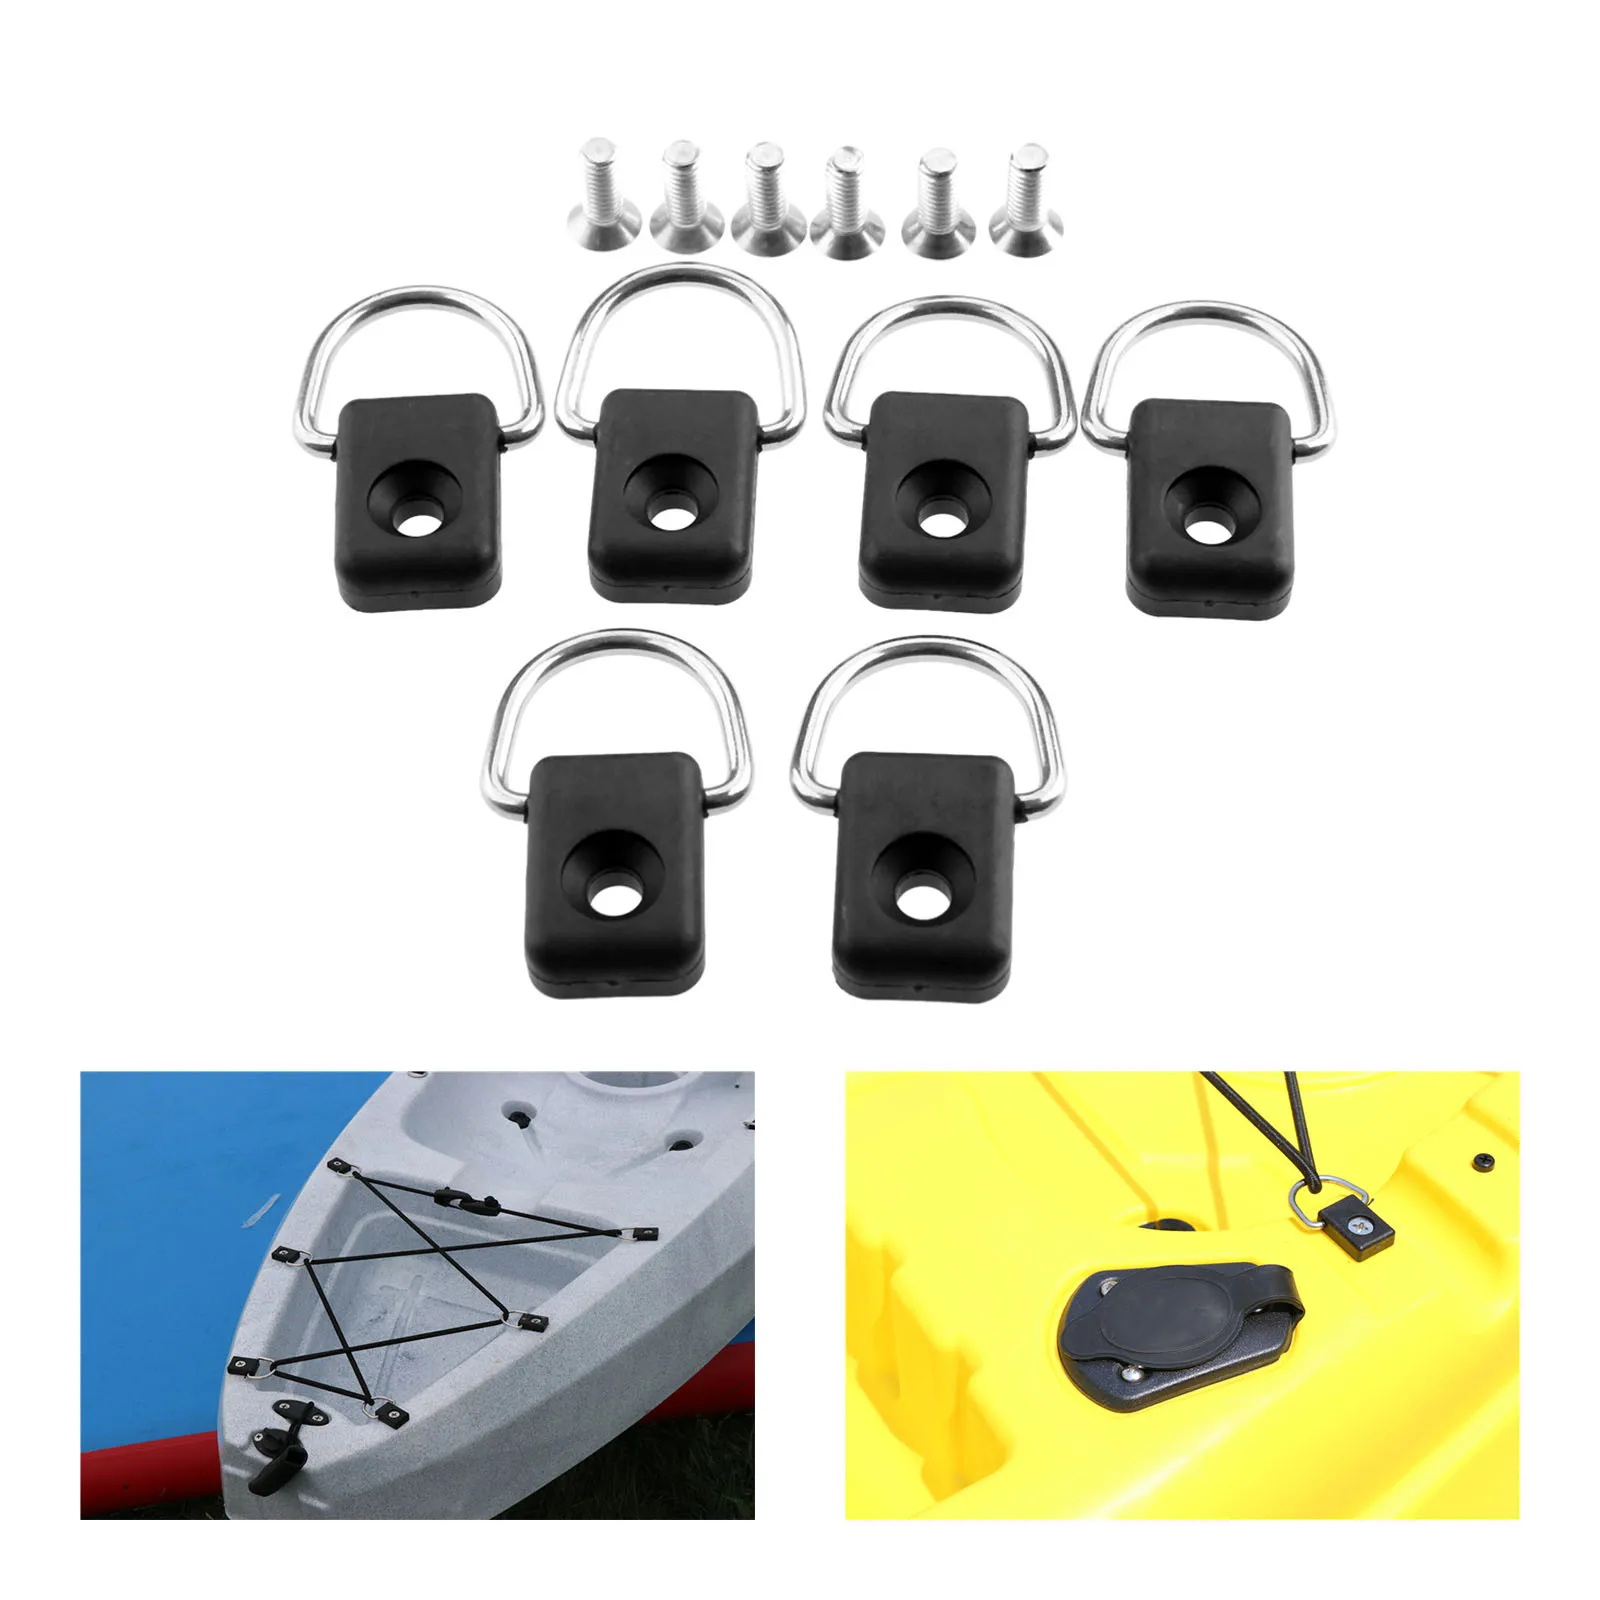 6 Pcs Nylon & Stainless Steel Kayak Boat Canoe Repair D Rings Fitting With Screw Fishing Rigging Bungee Rowing Boats Accessories